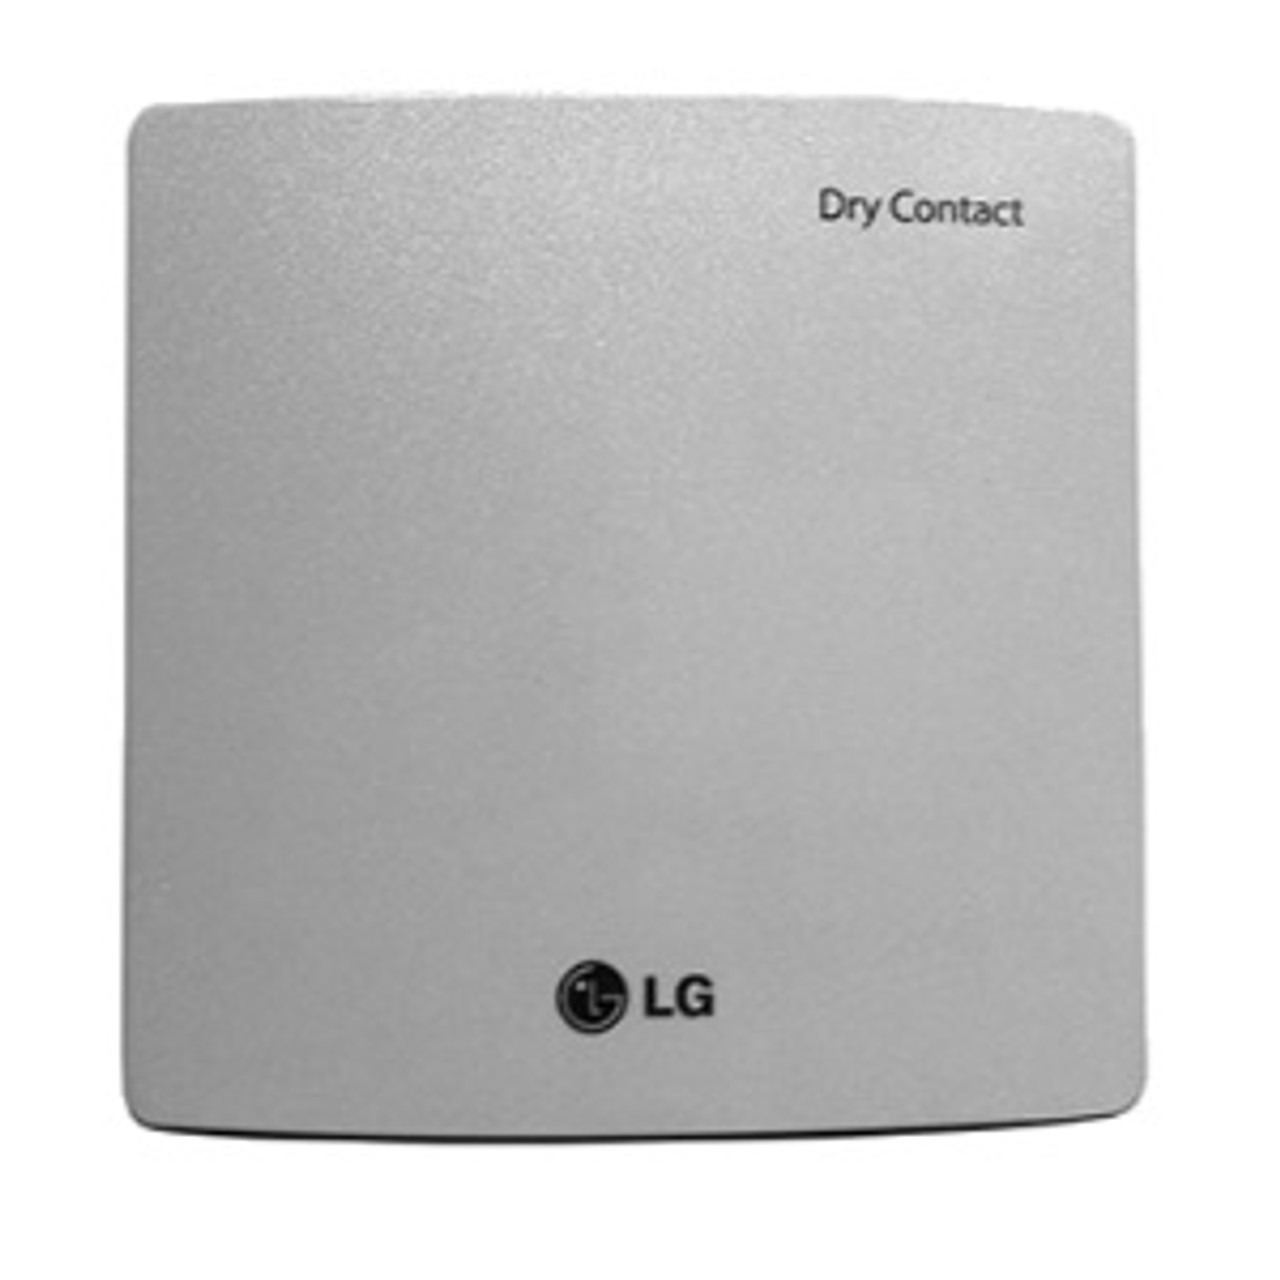 Toevlucht Mount Bank Nodig uit LG PDRYCB300 Dry Contact for Third Party Thermostat - Rfwel Engr E-Store